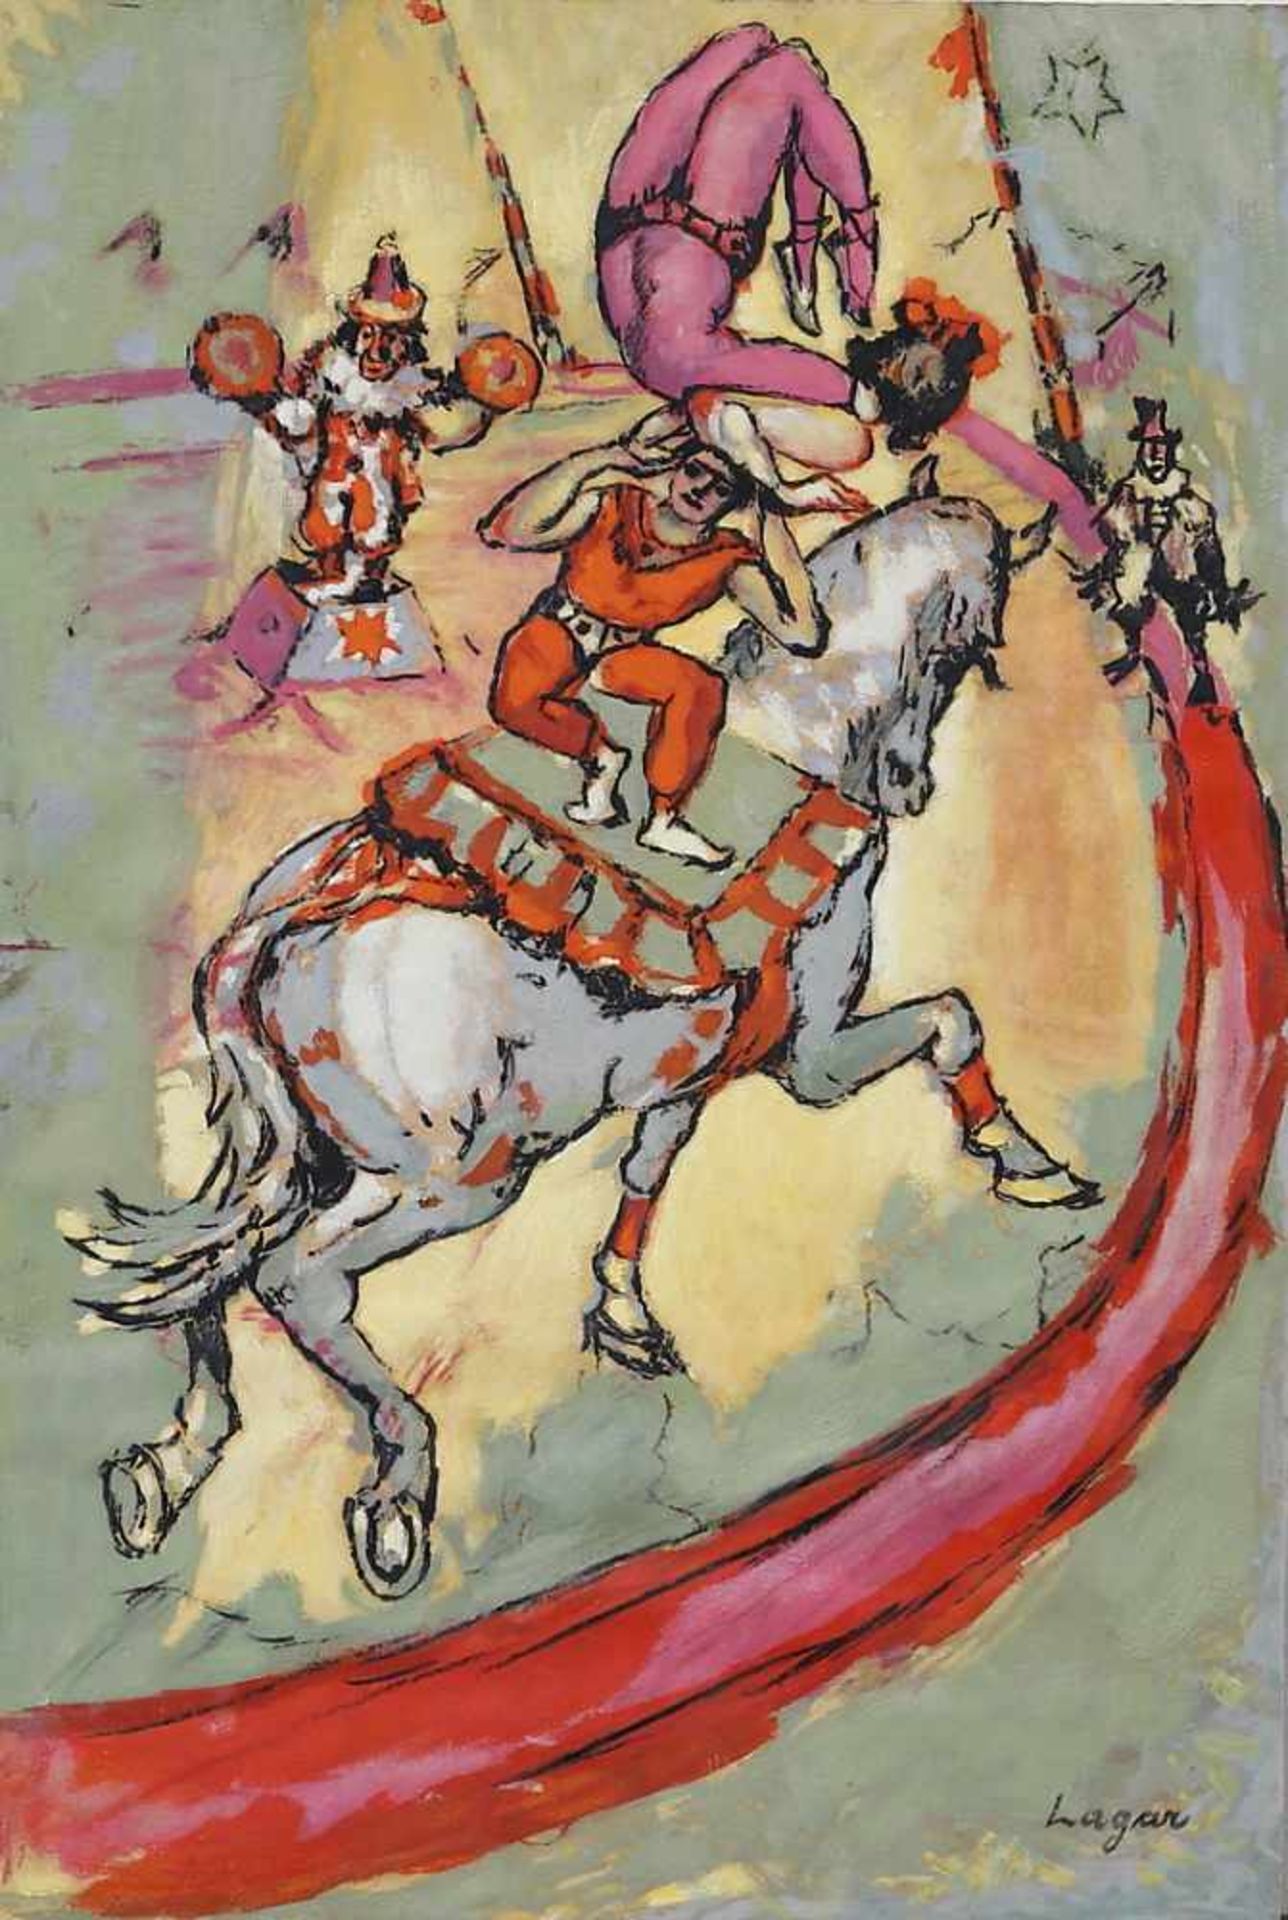 CELSO LAGAR. Circus scene.Gouache and ink on paper stuck to cardboard Signed. Probably made circa